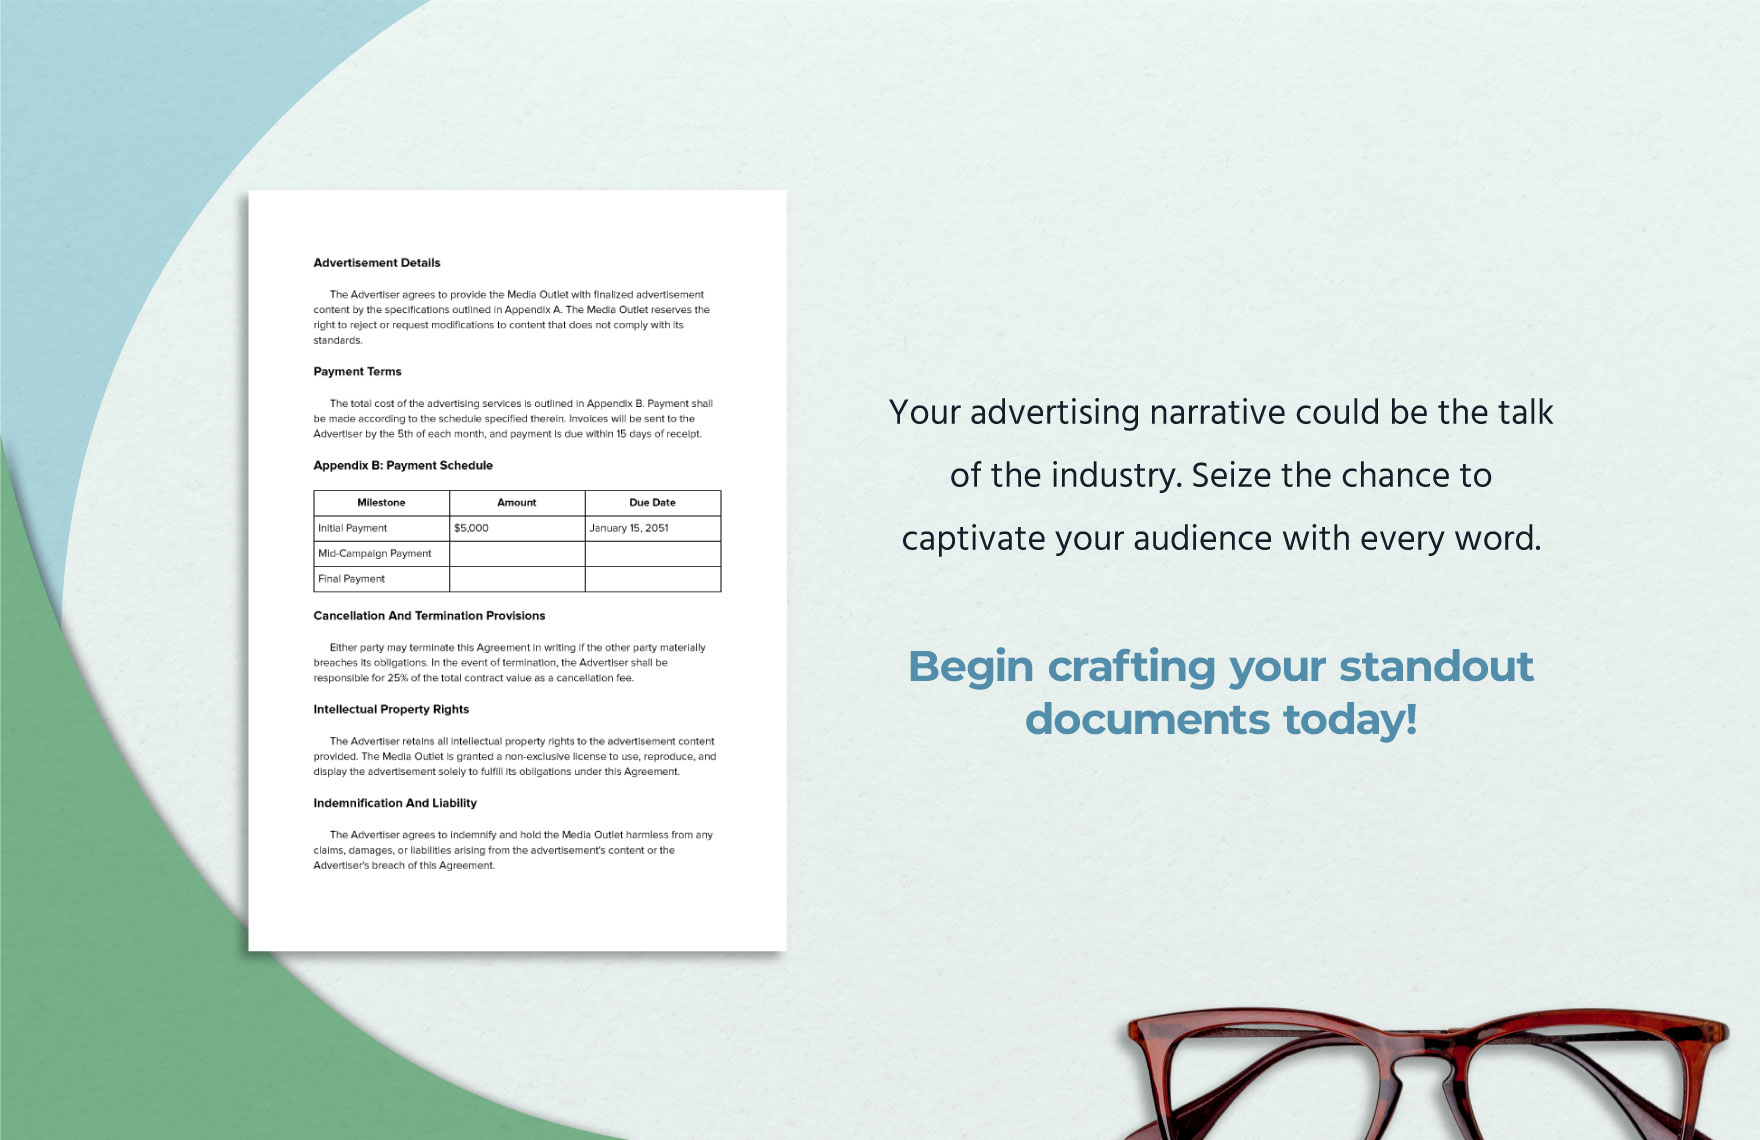 Advertising Traditional Media Agreement Form Template